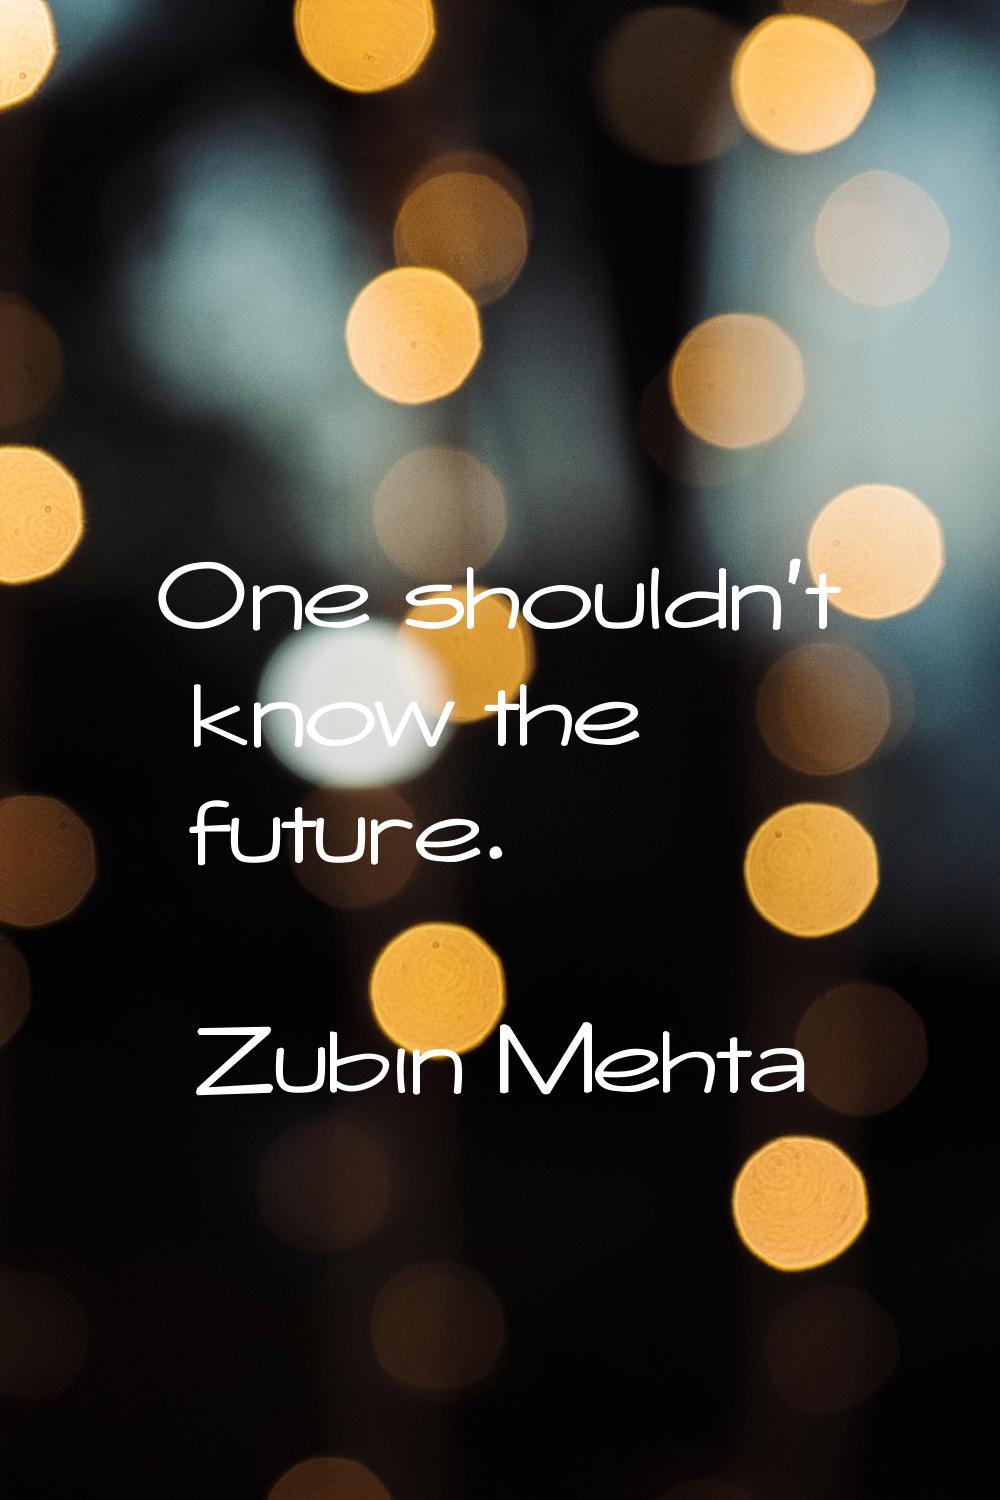 One shouldn't know the future.